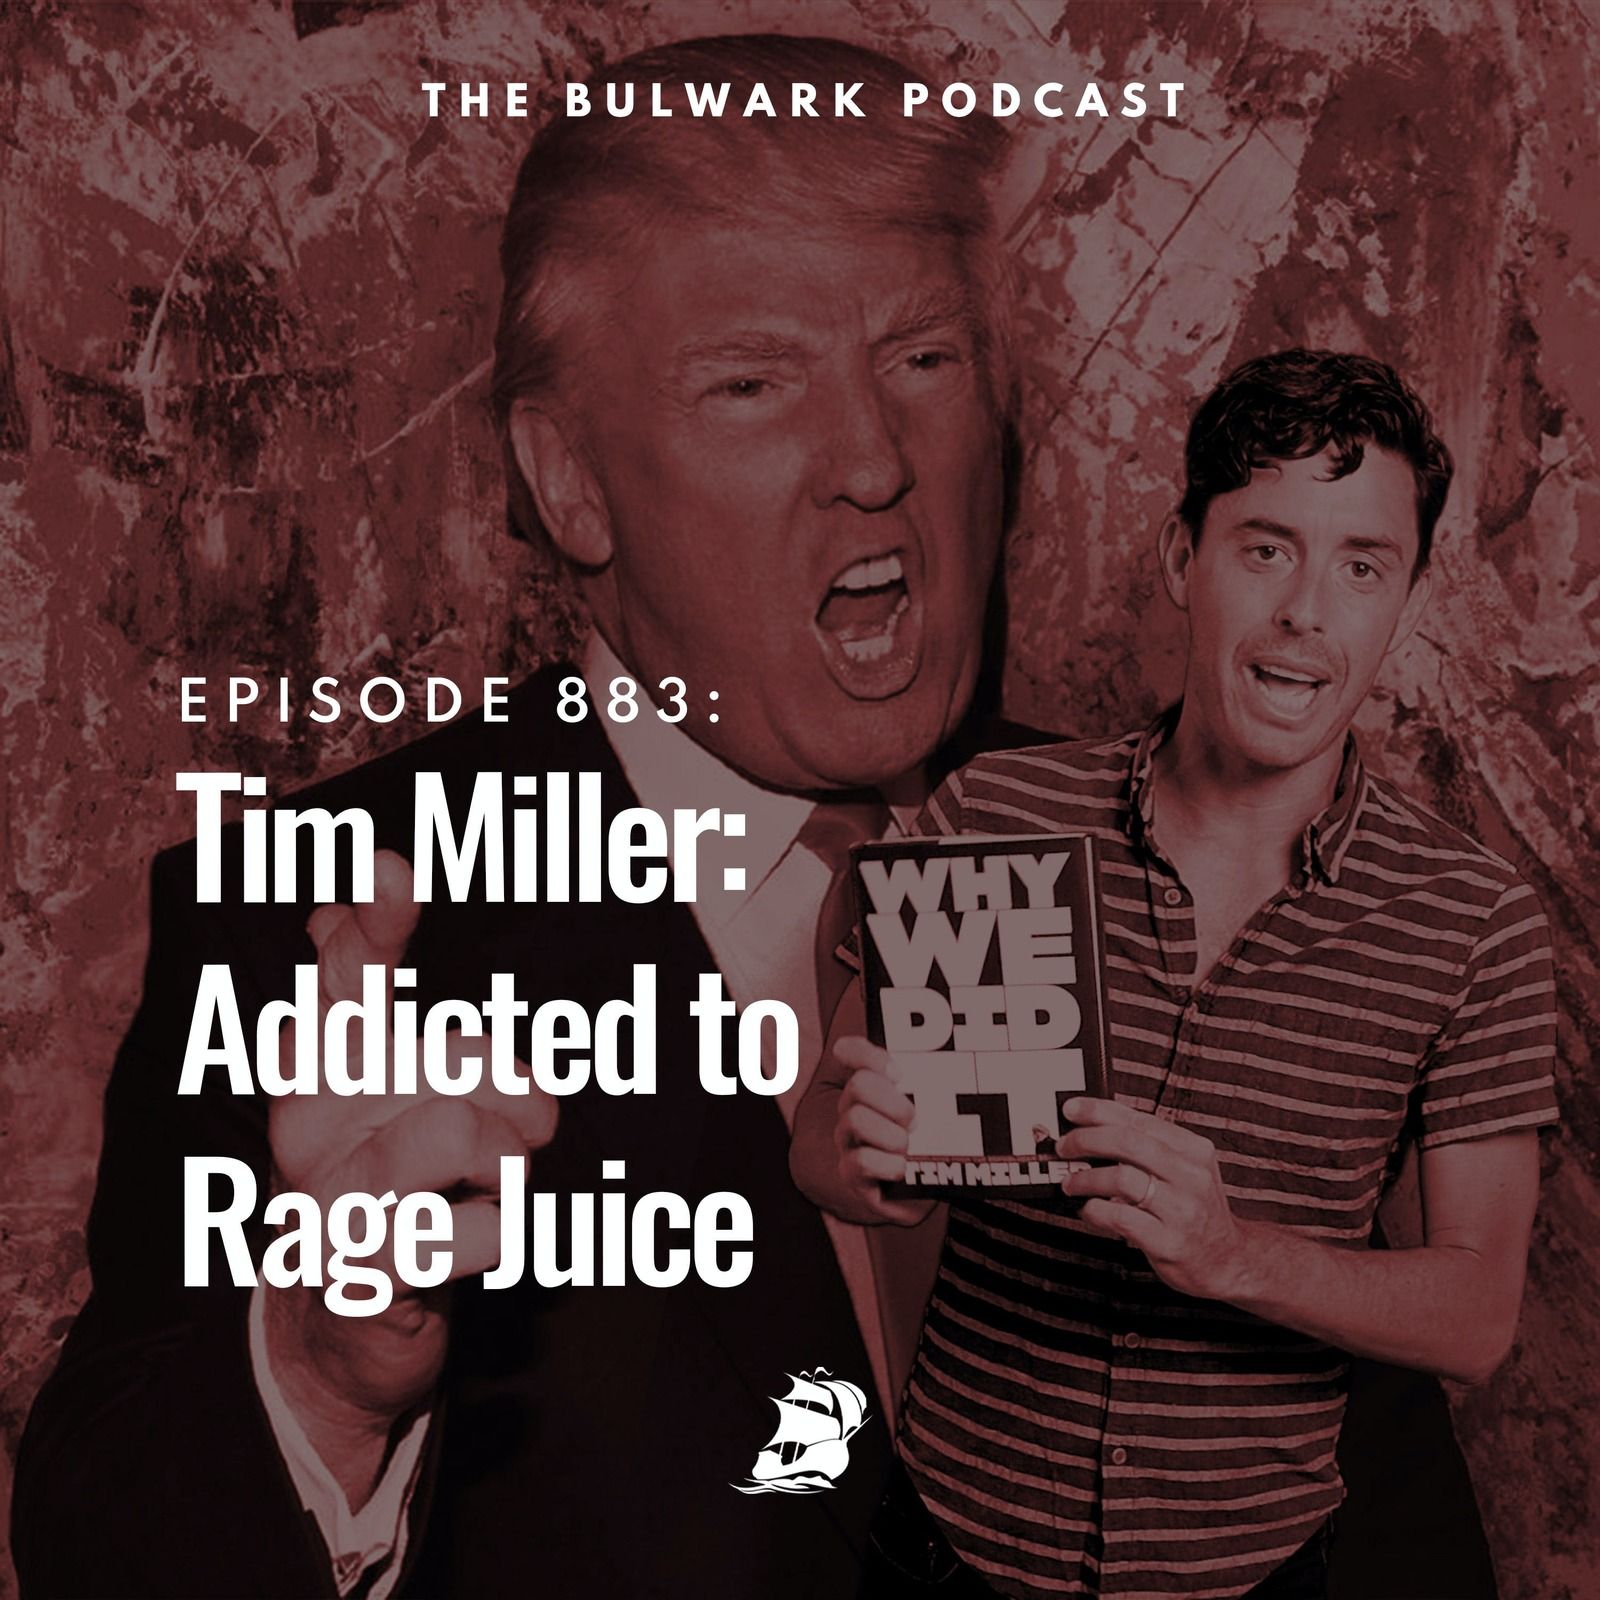 Addicted to Rage Juice (with Tim Miller) by The Bulwark Podcast